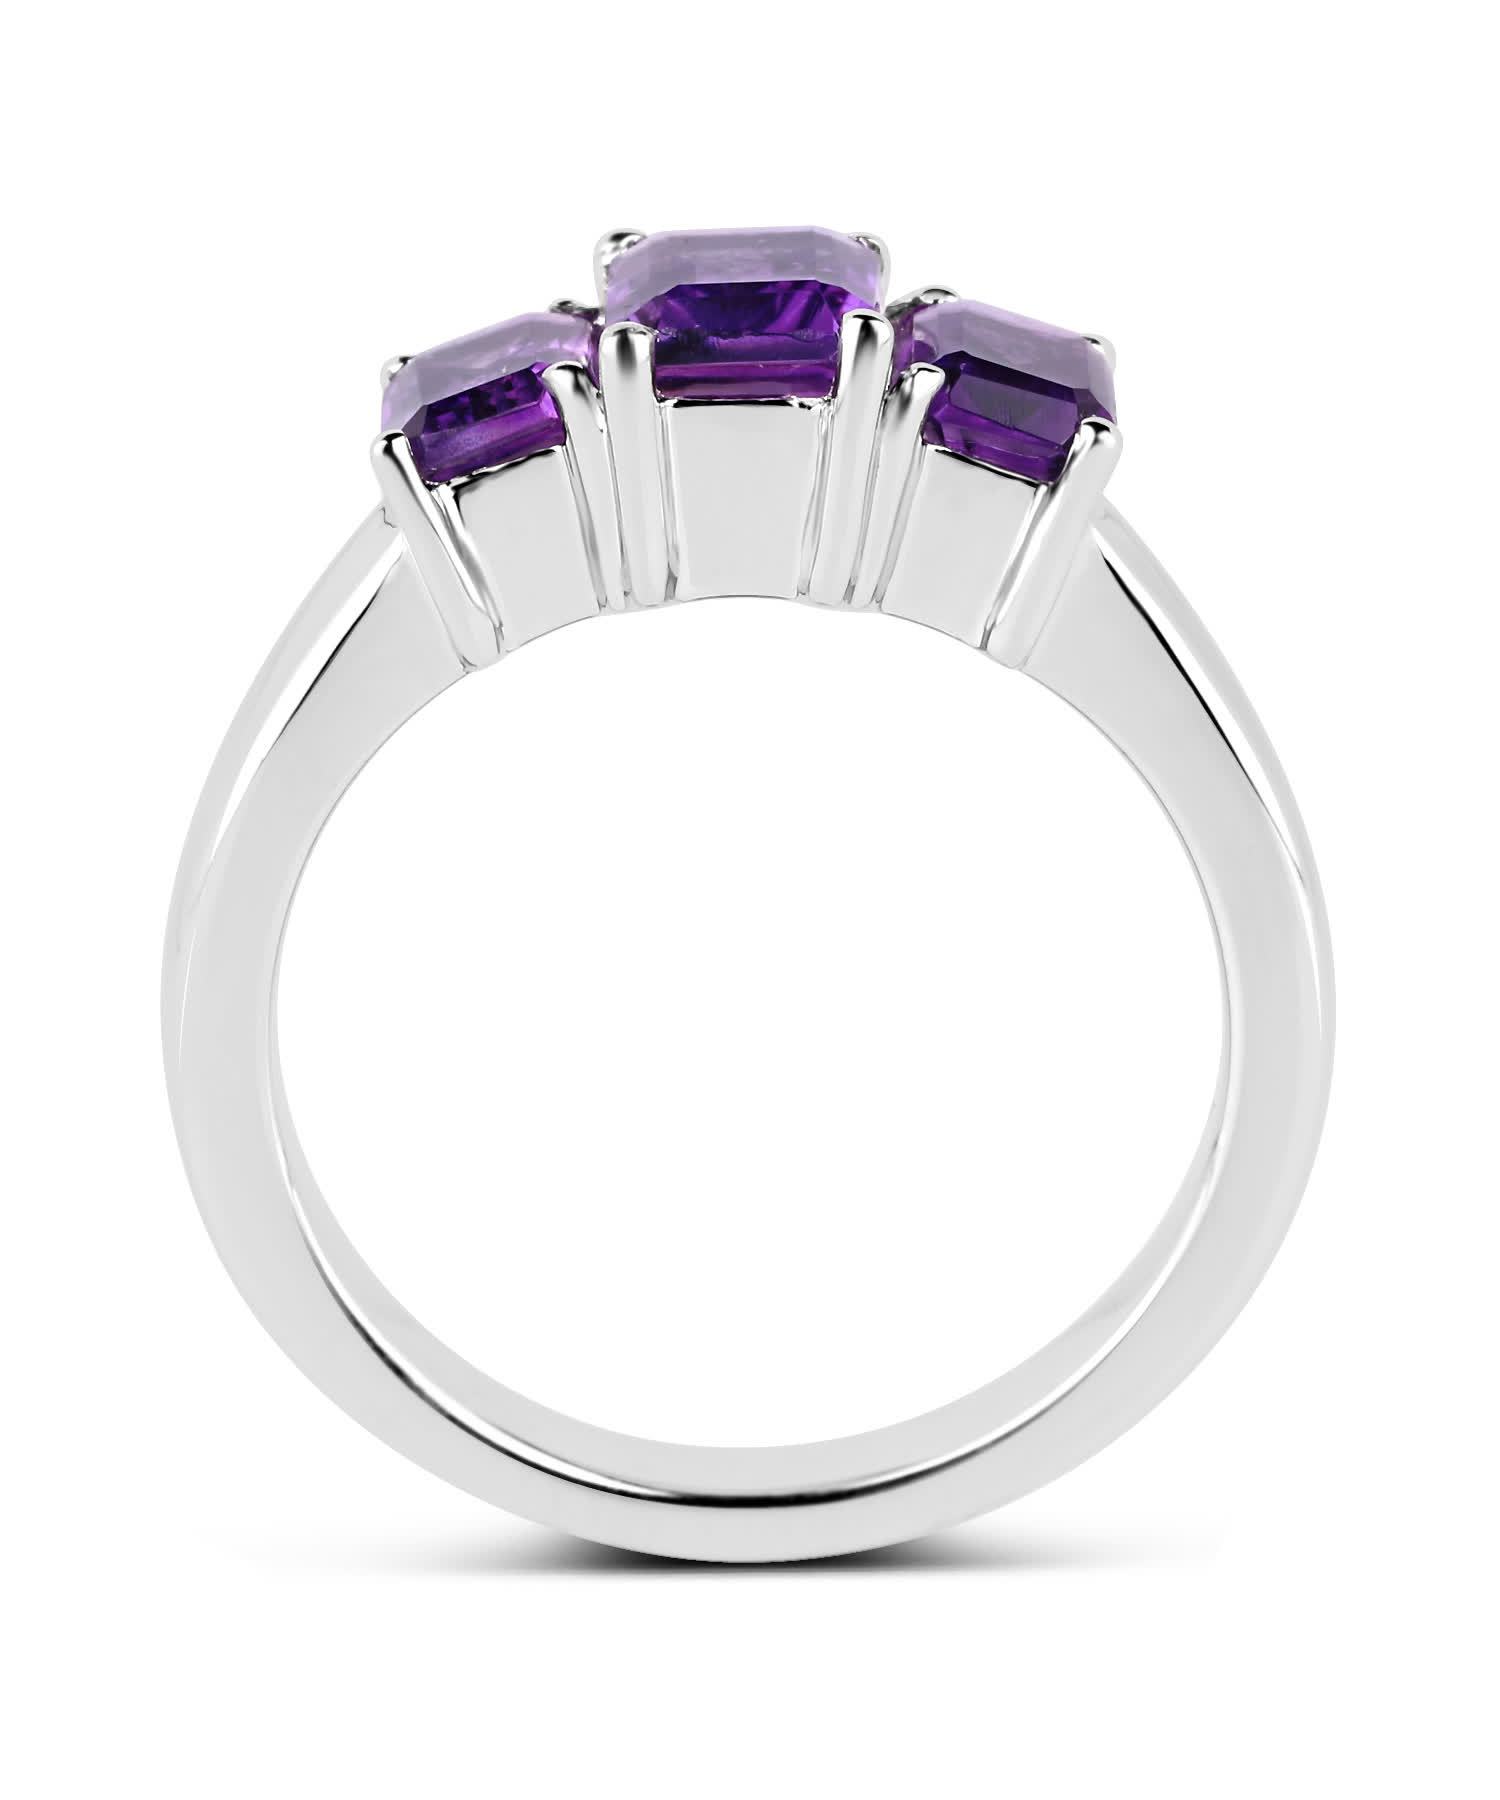 2.10ctw Natural Amethyst Rhodium Plated 925 Sterling Silver Three-Stone Ring View 2